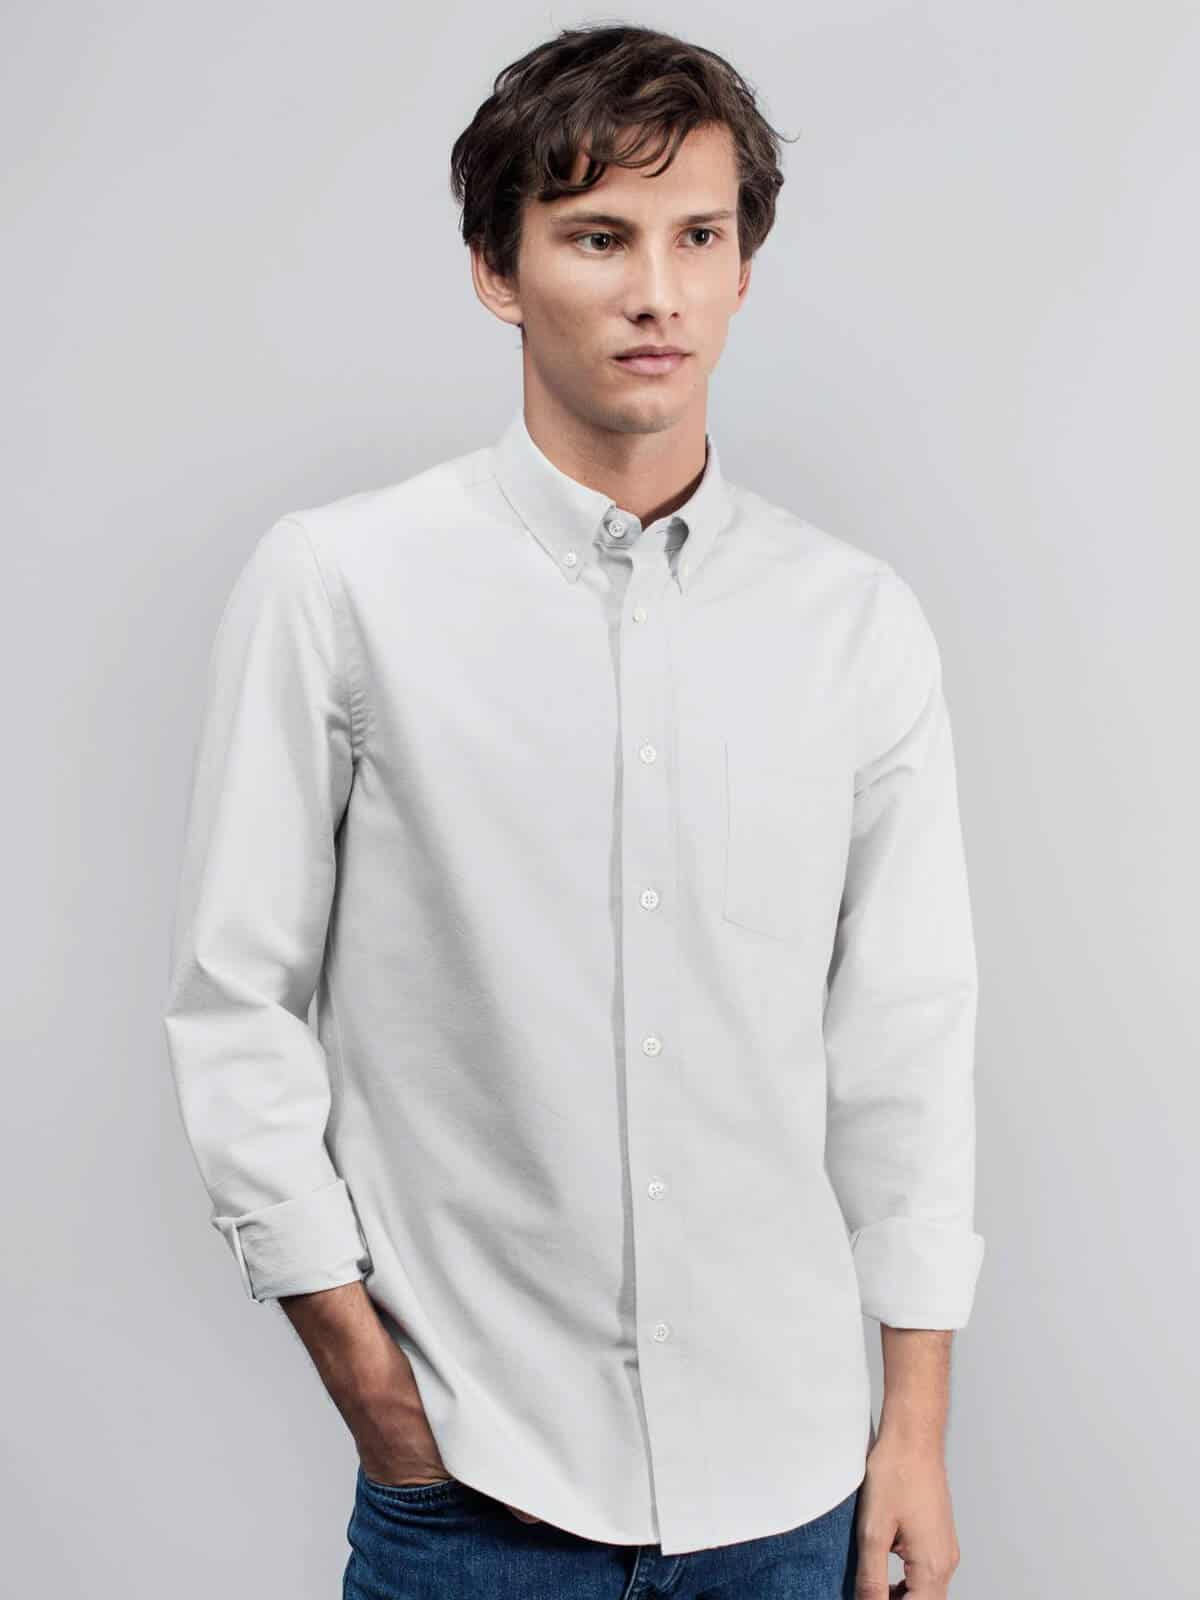 Person wearing a grey button-up with blue jeans.